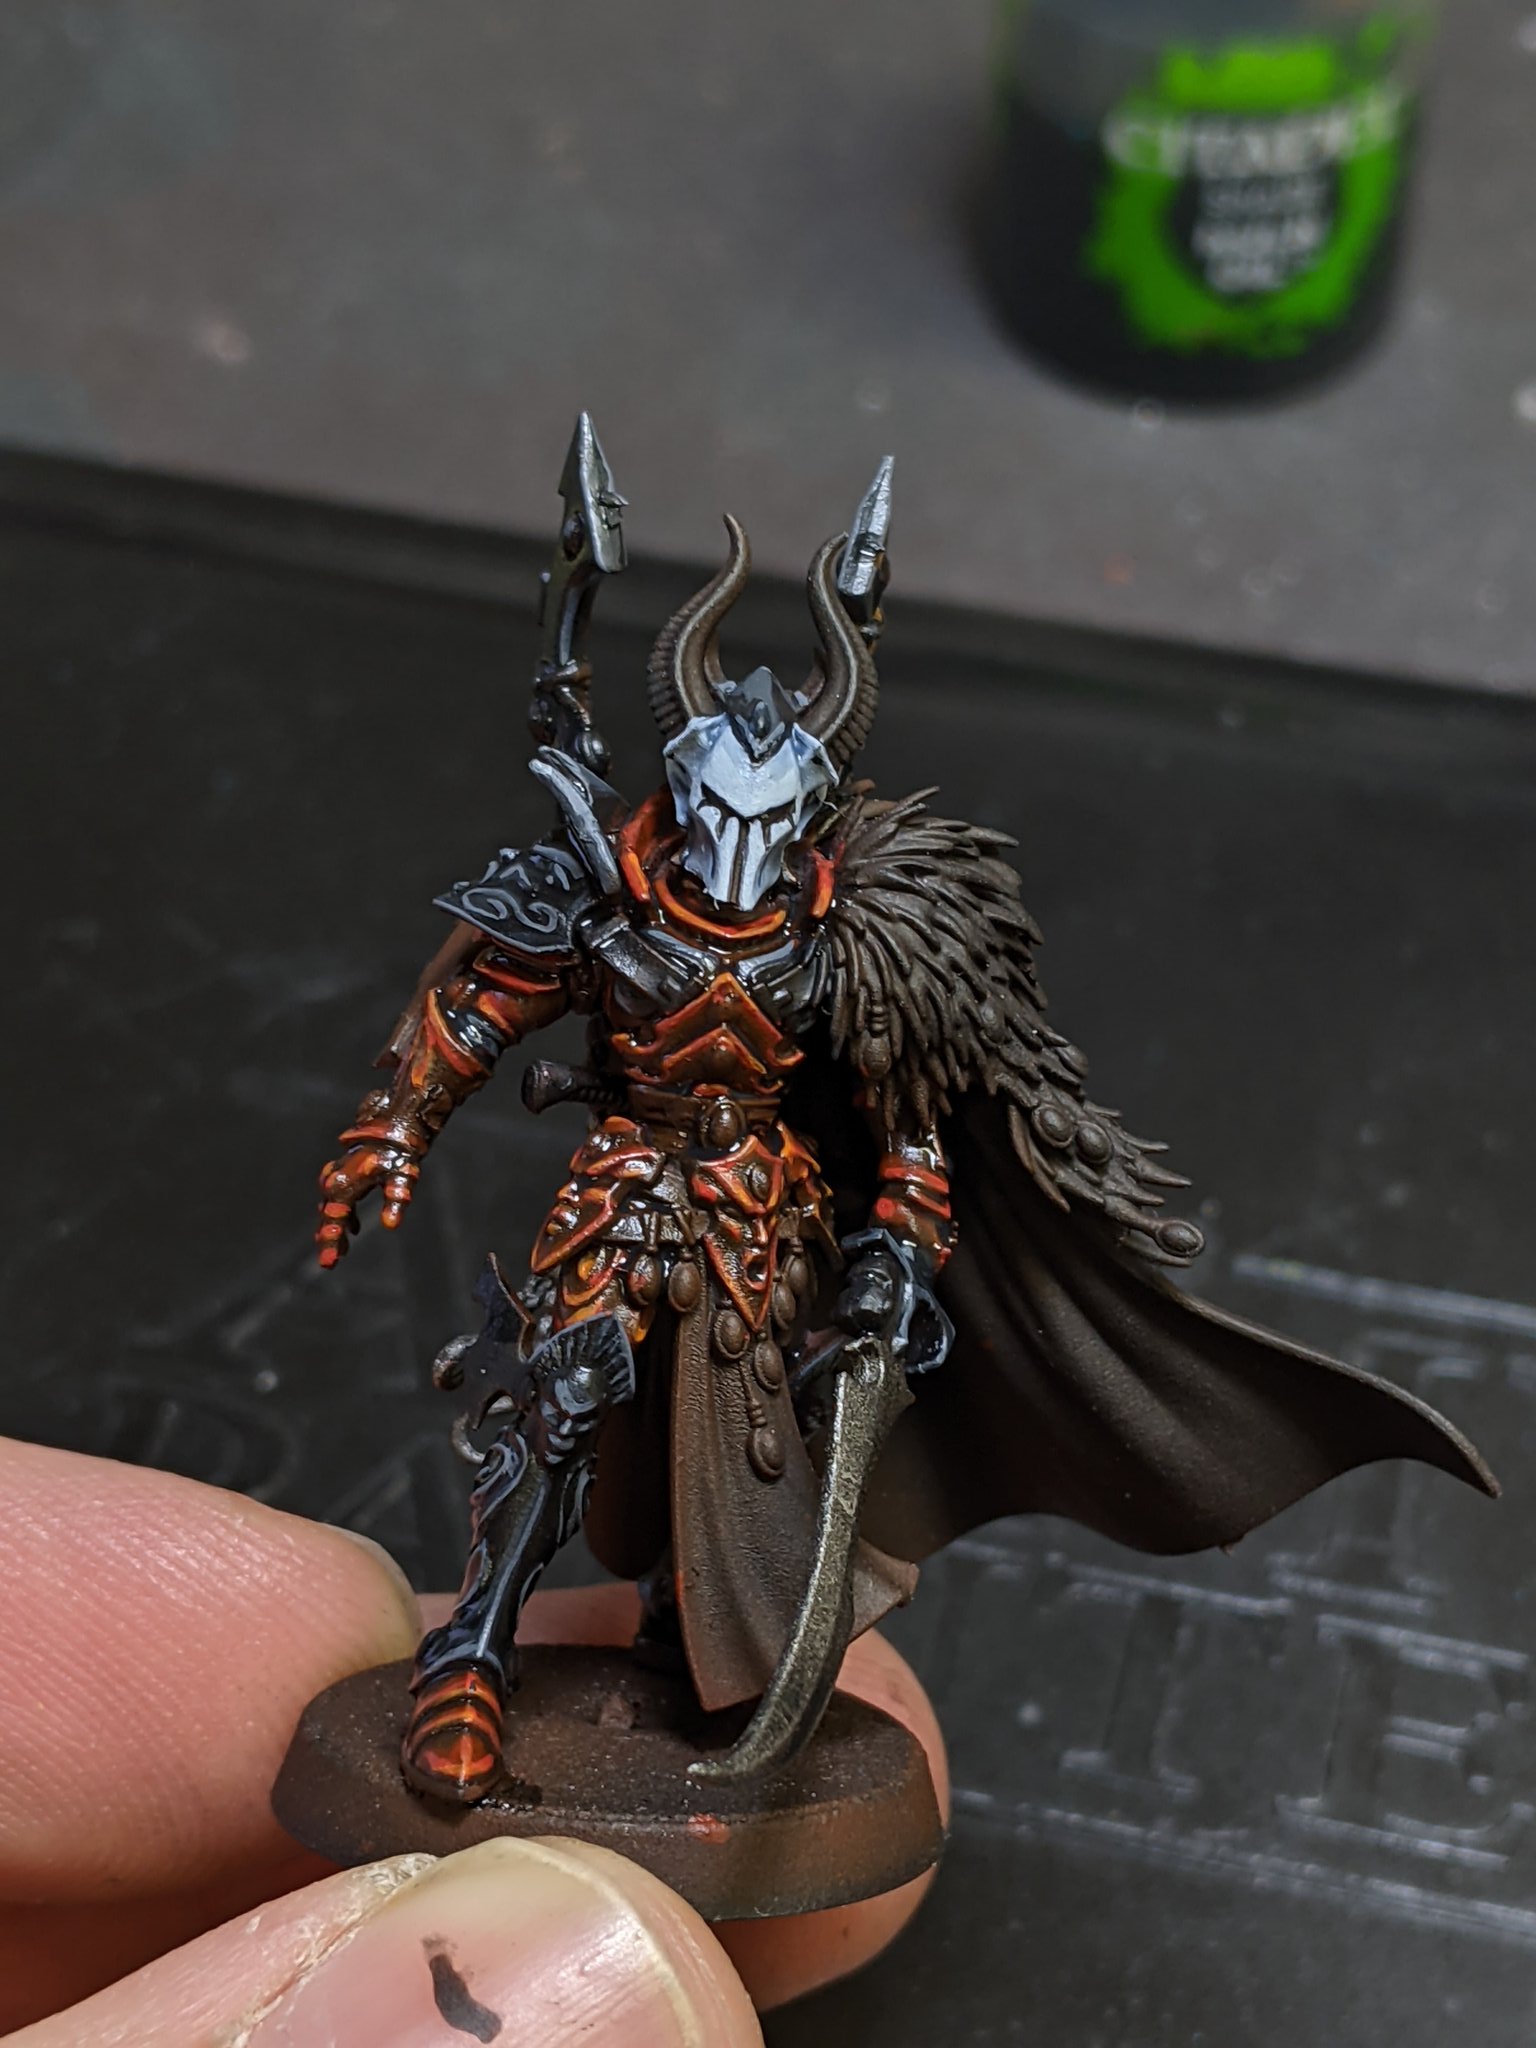 One Inch Heroes on X: Using Nuln Oil on Drukhari doesn't even